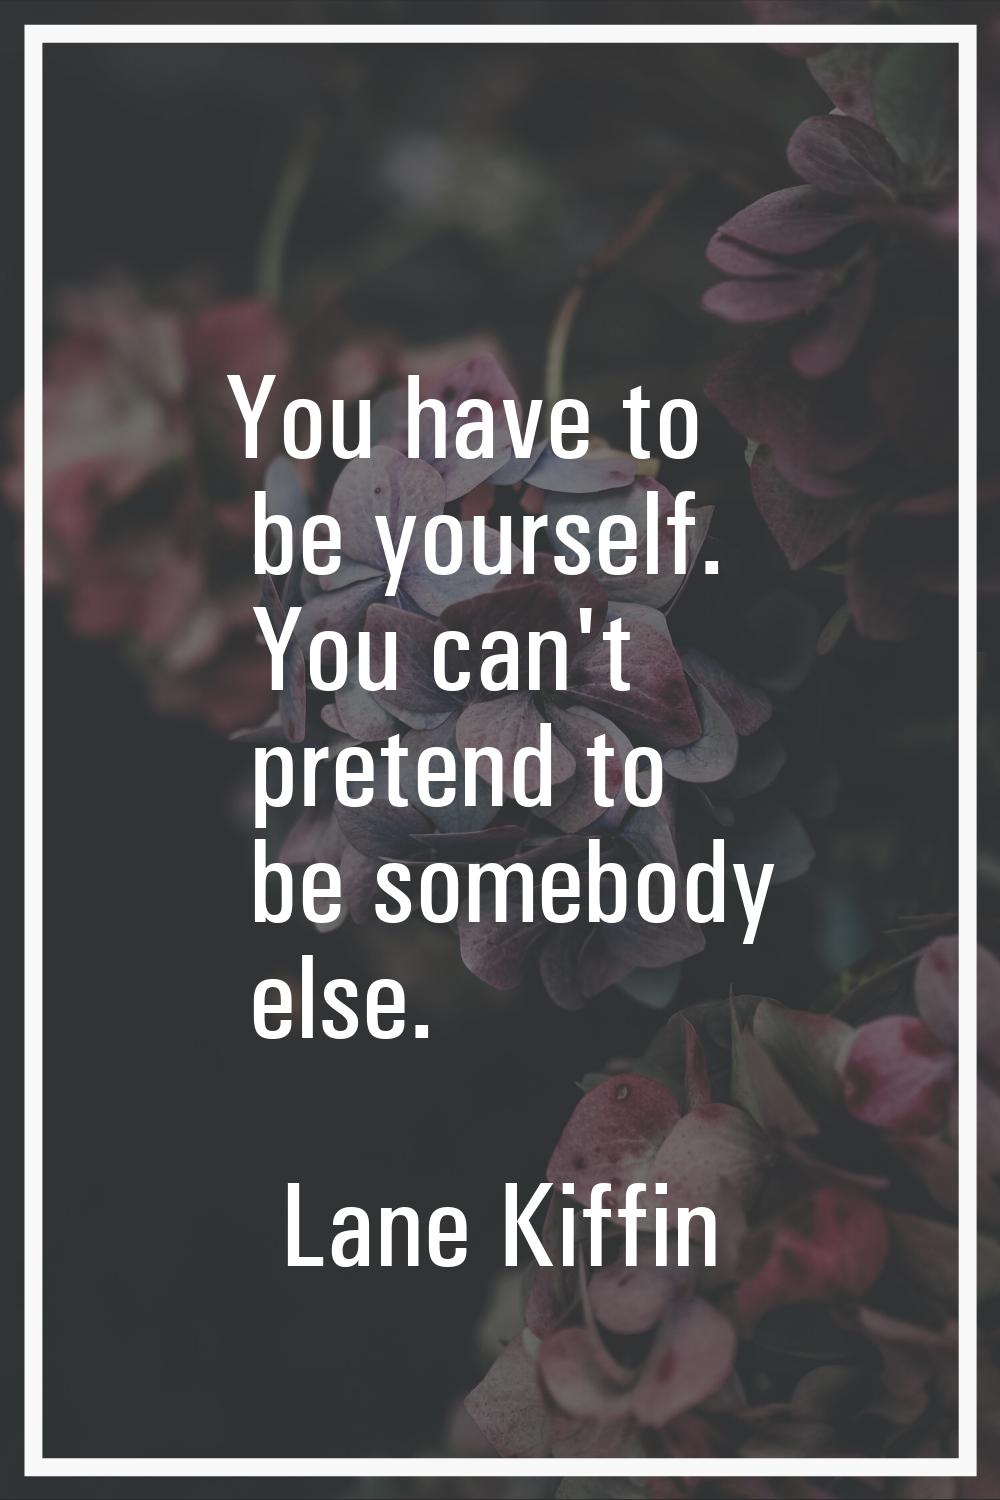 You have to be yourself. You can't pretend to be somebody else.